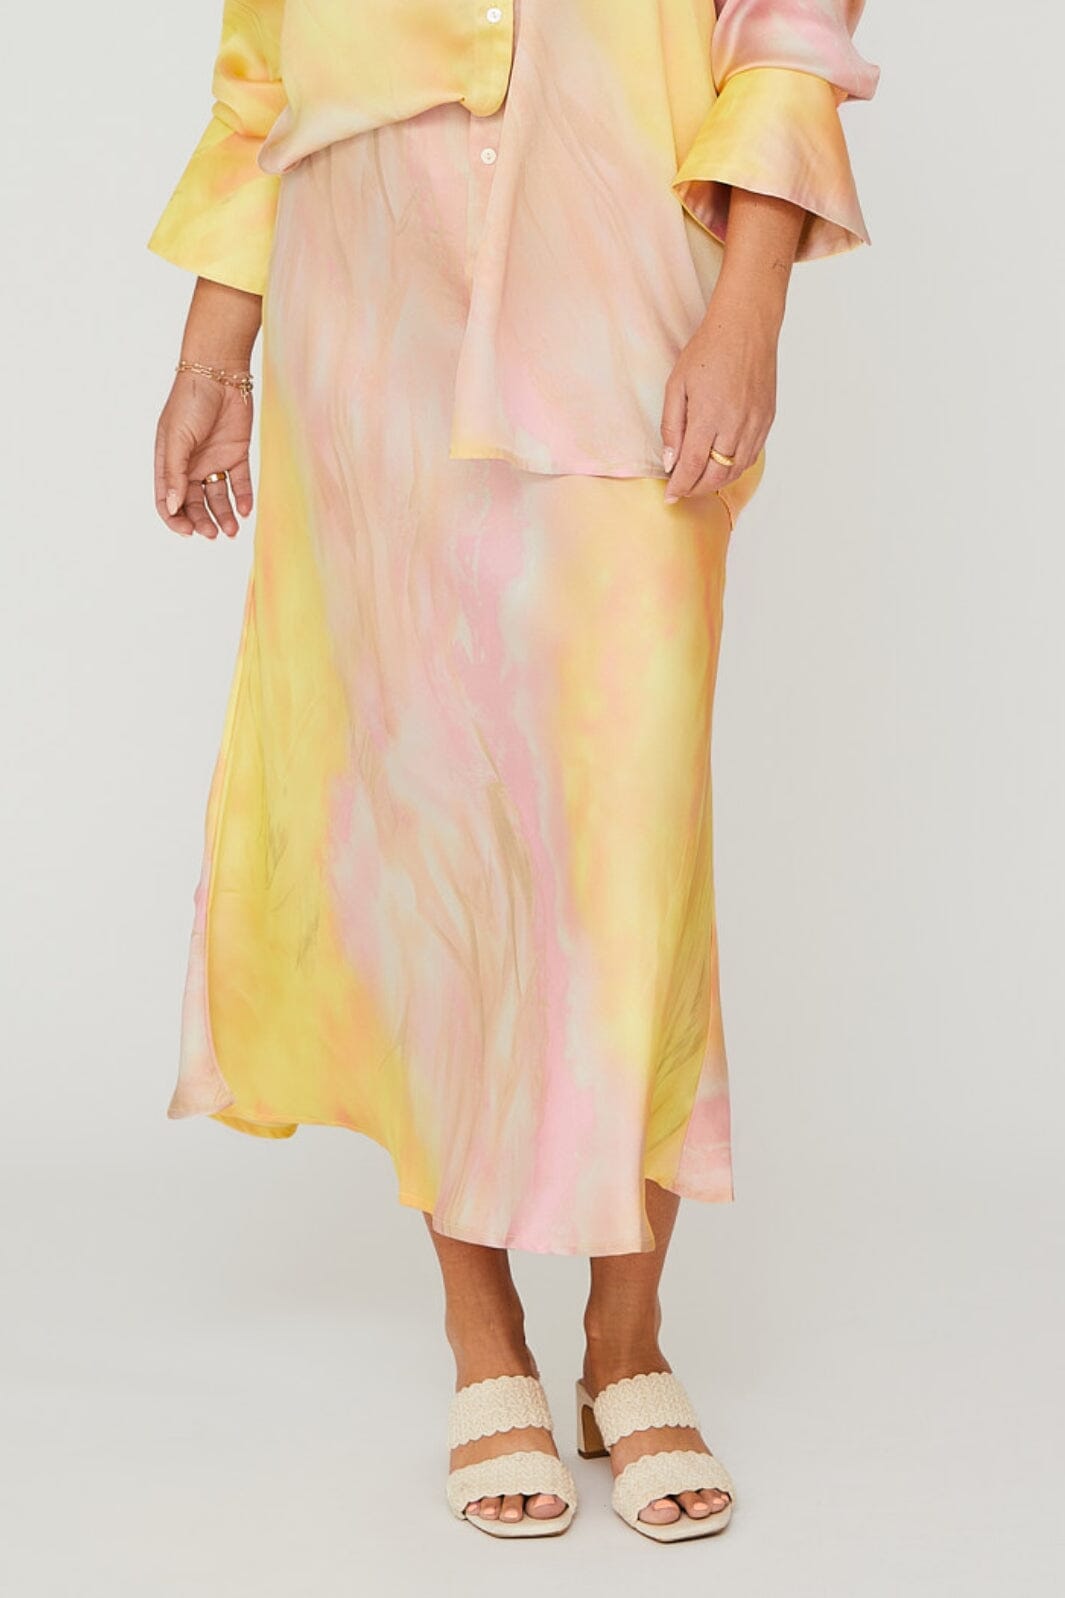 A-View - Carry Skirt - 302 Yellow/Rose Nederdele 